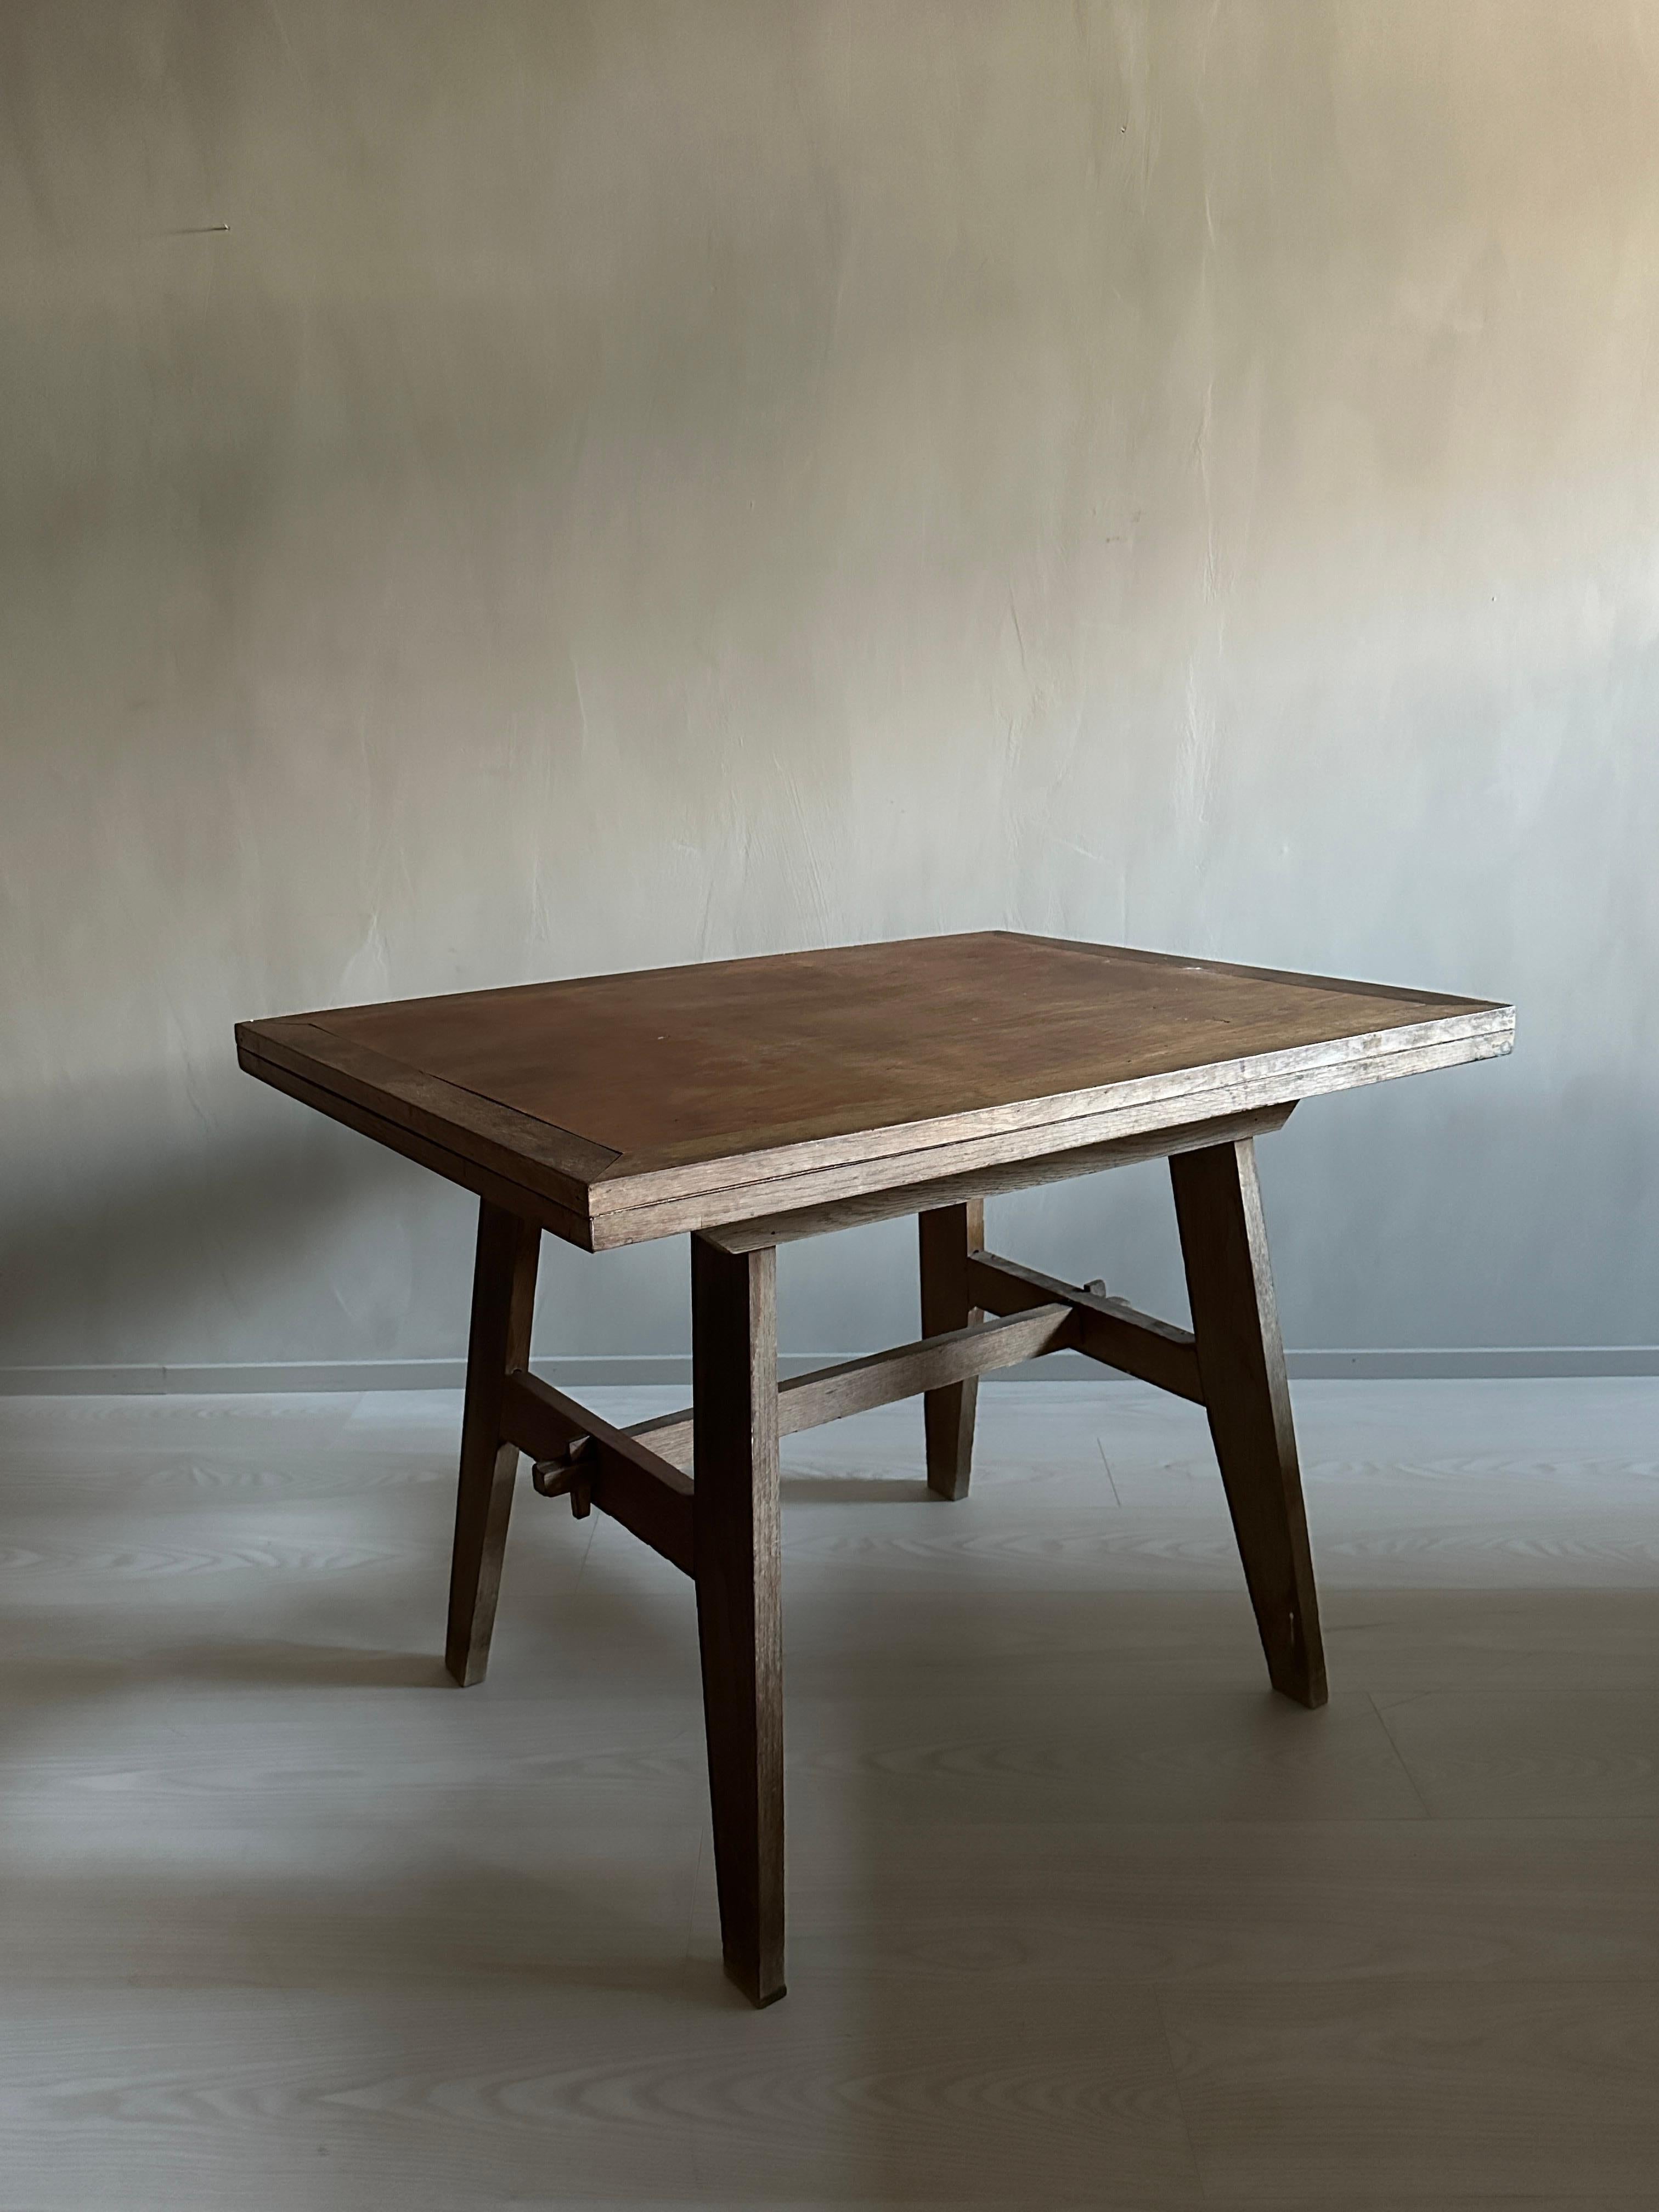 French Mid-Century Oak Wood Table by René Gabriel, France, c. 1940s For Sale